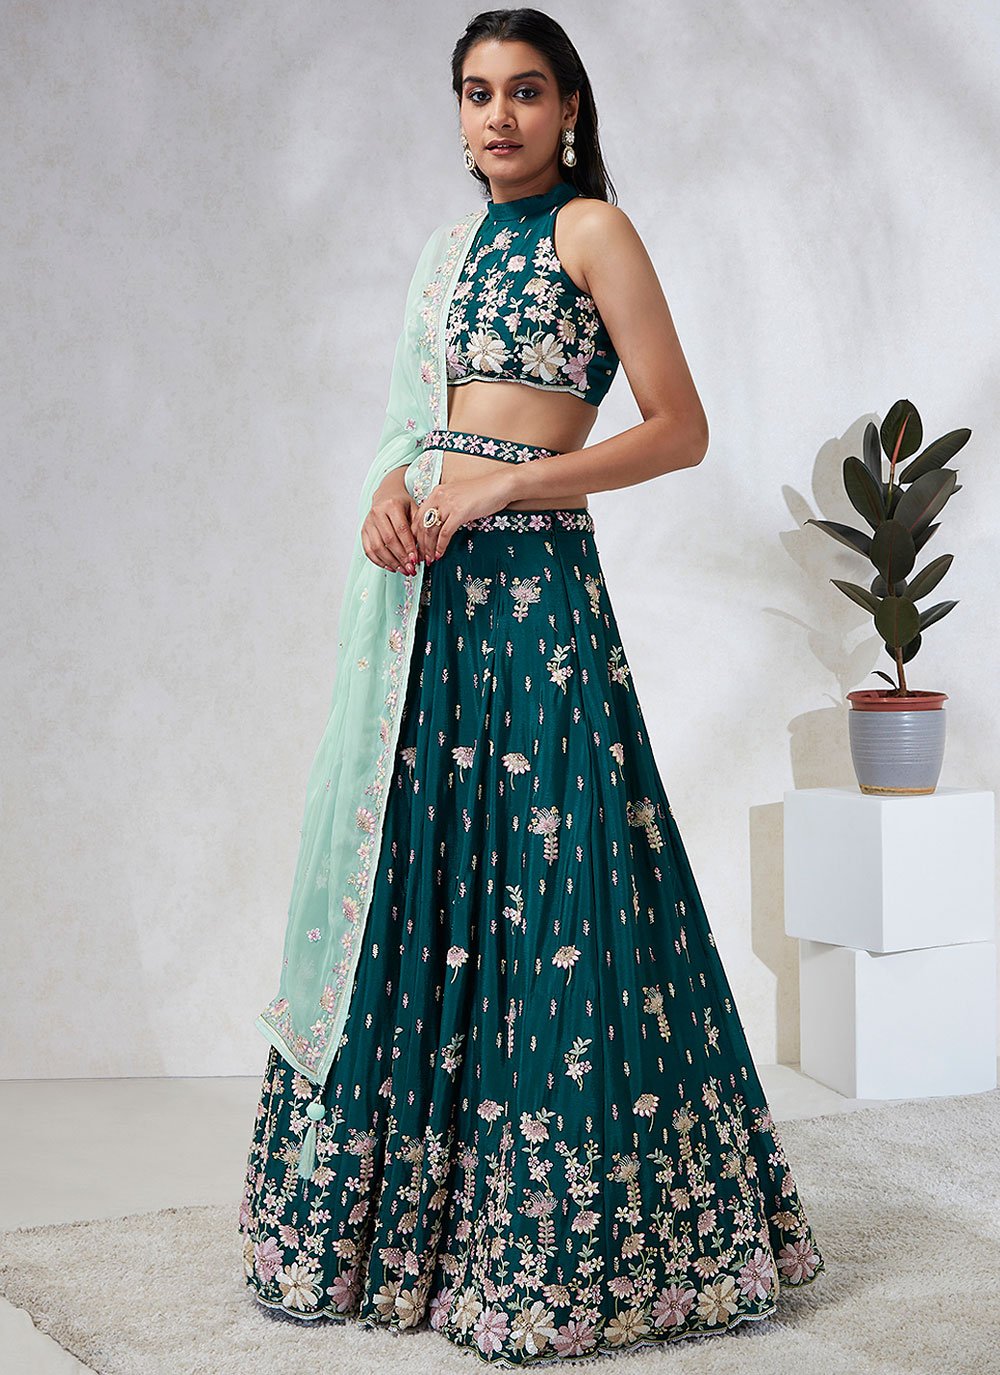 Opulent Green Poly Georgette Lehenga Choli Set with Exquisite Printing and Swarovski Work